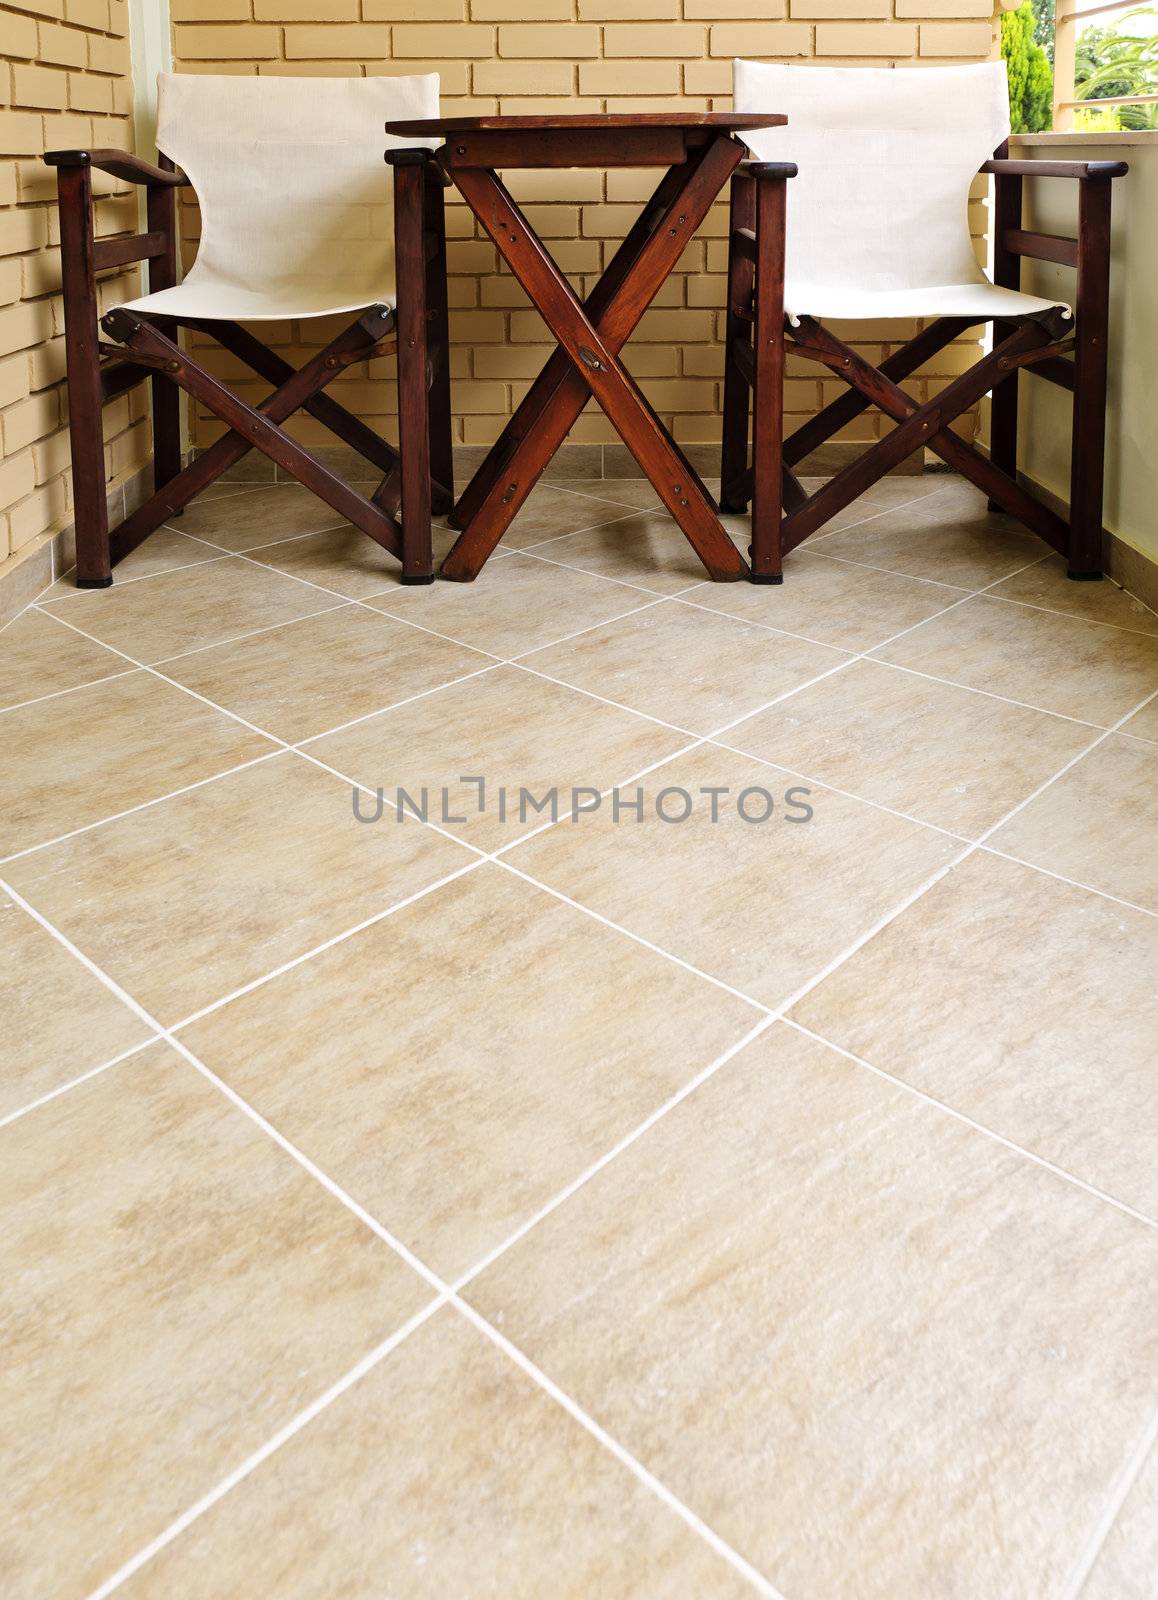 Wooden chairs and table on ceramic tile floor of balcony